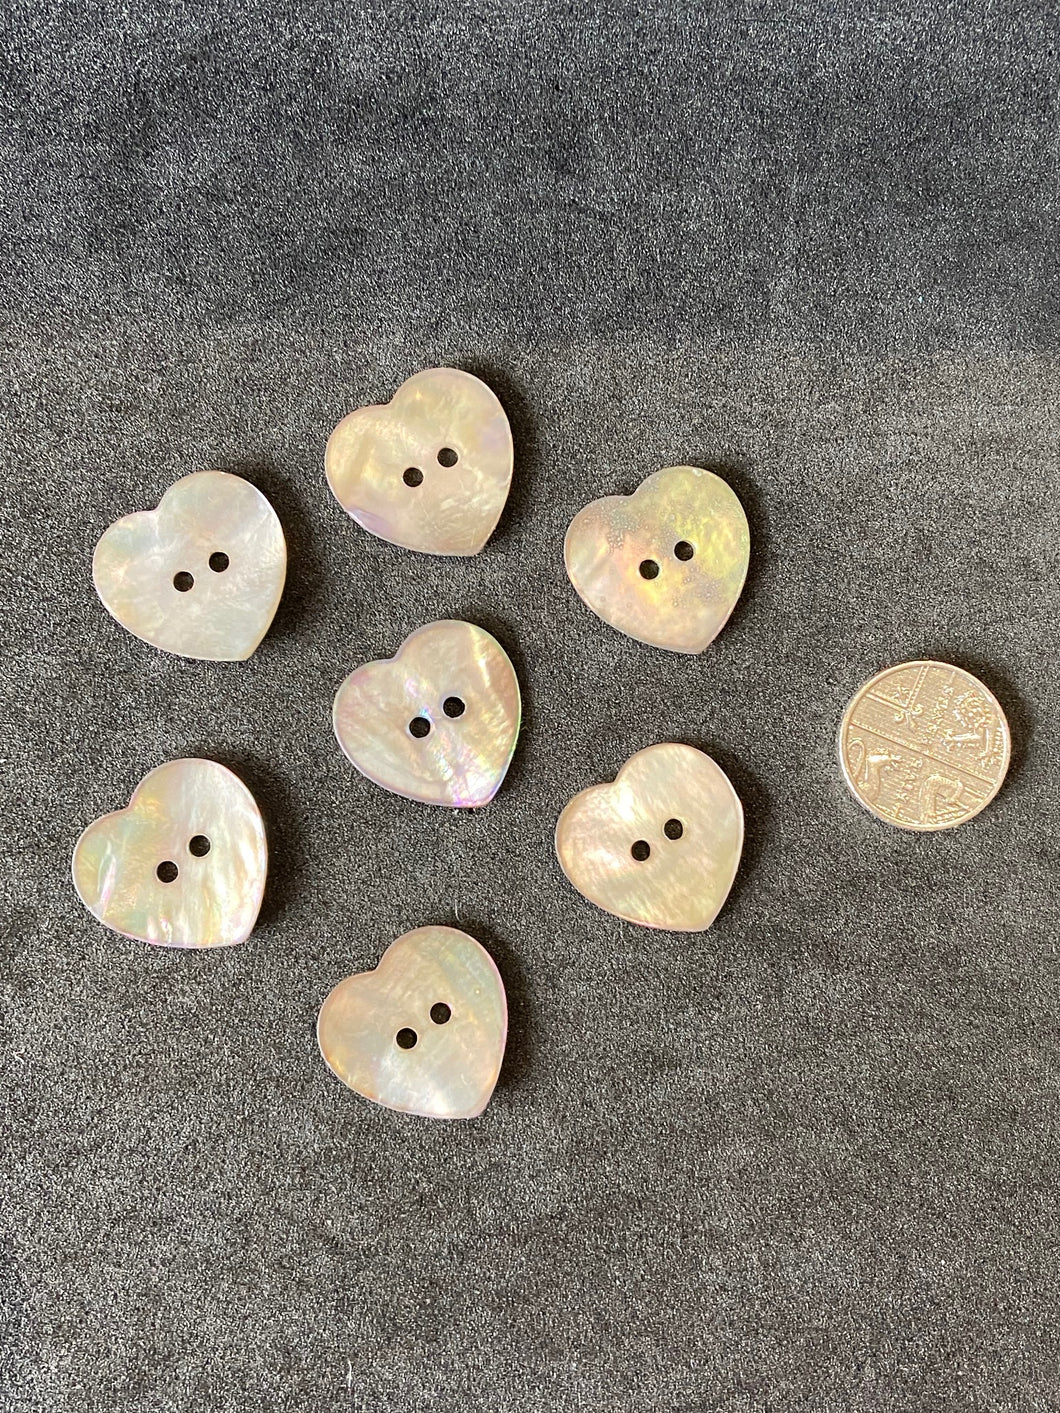 fabric shack haberdashery sewing dressmaking buttons 2 hole shell hearts 20mm